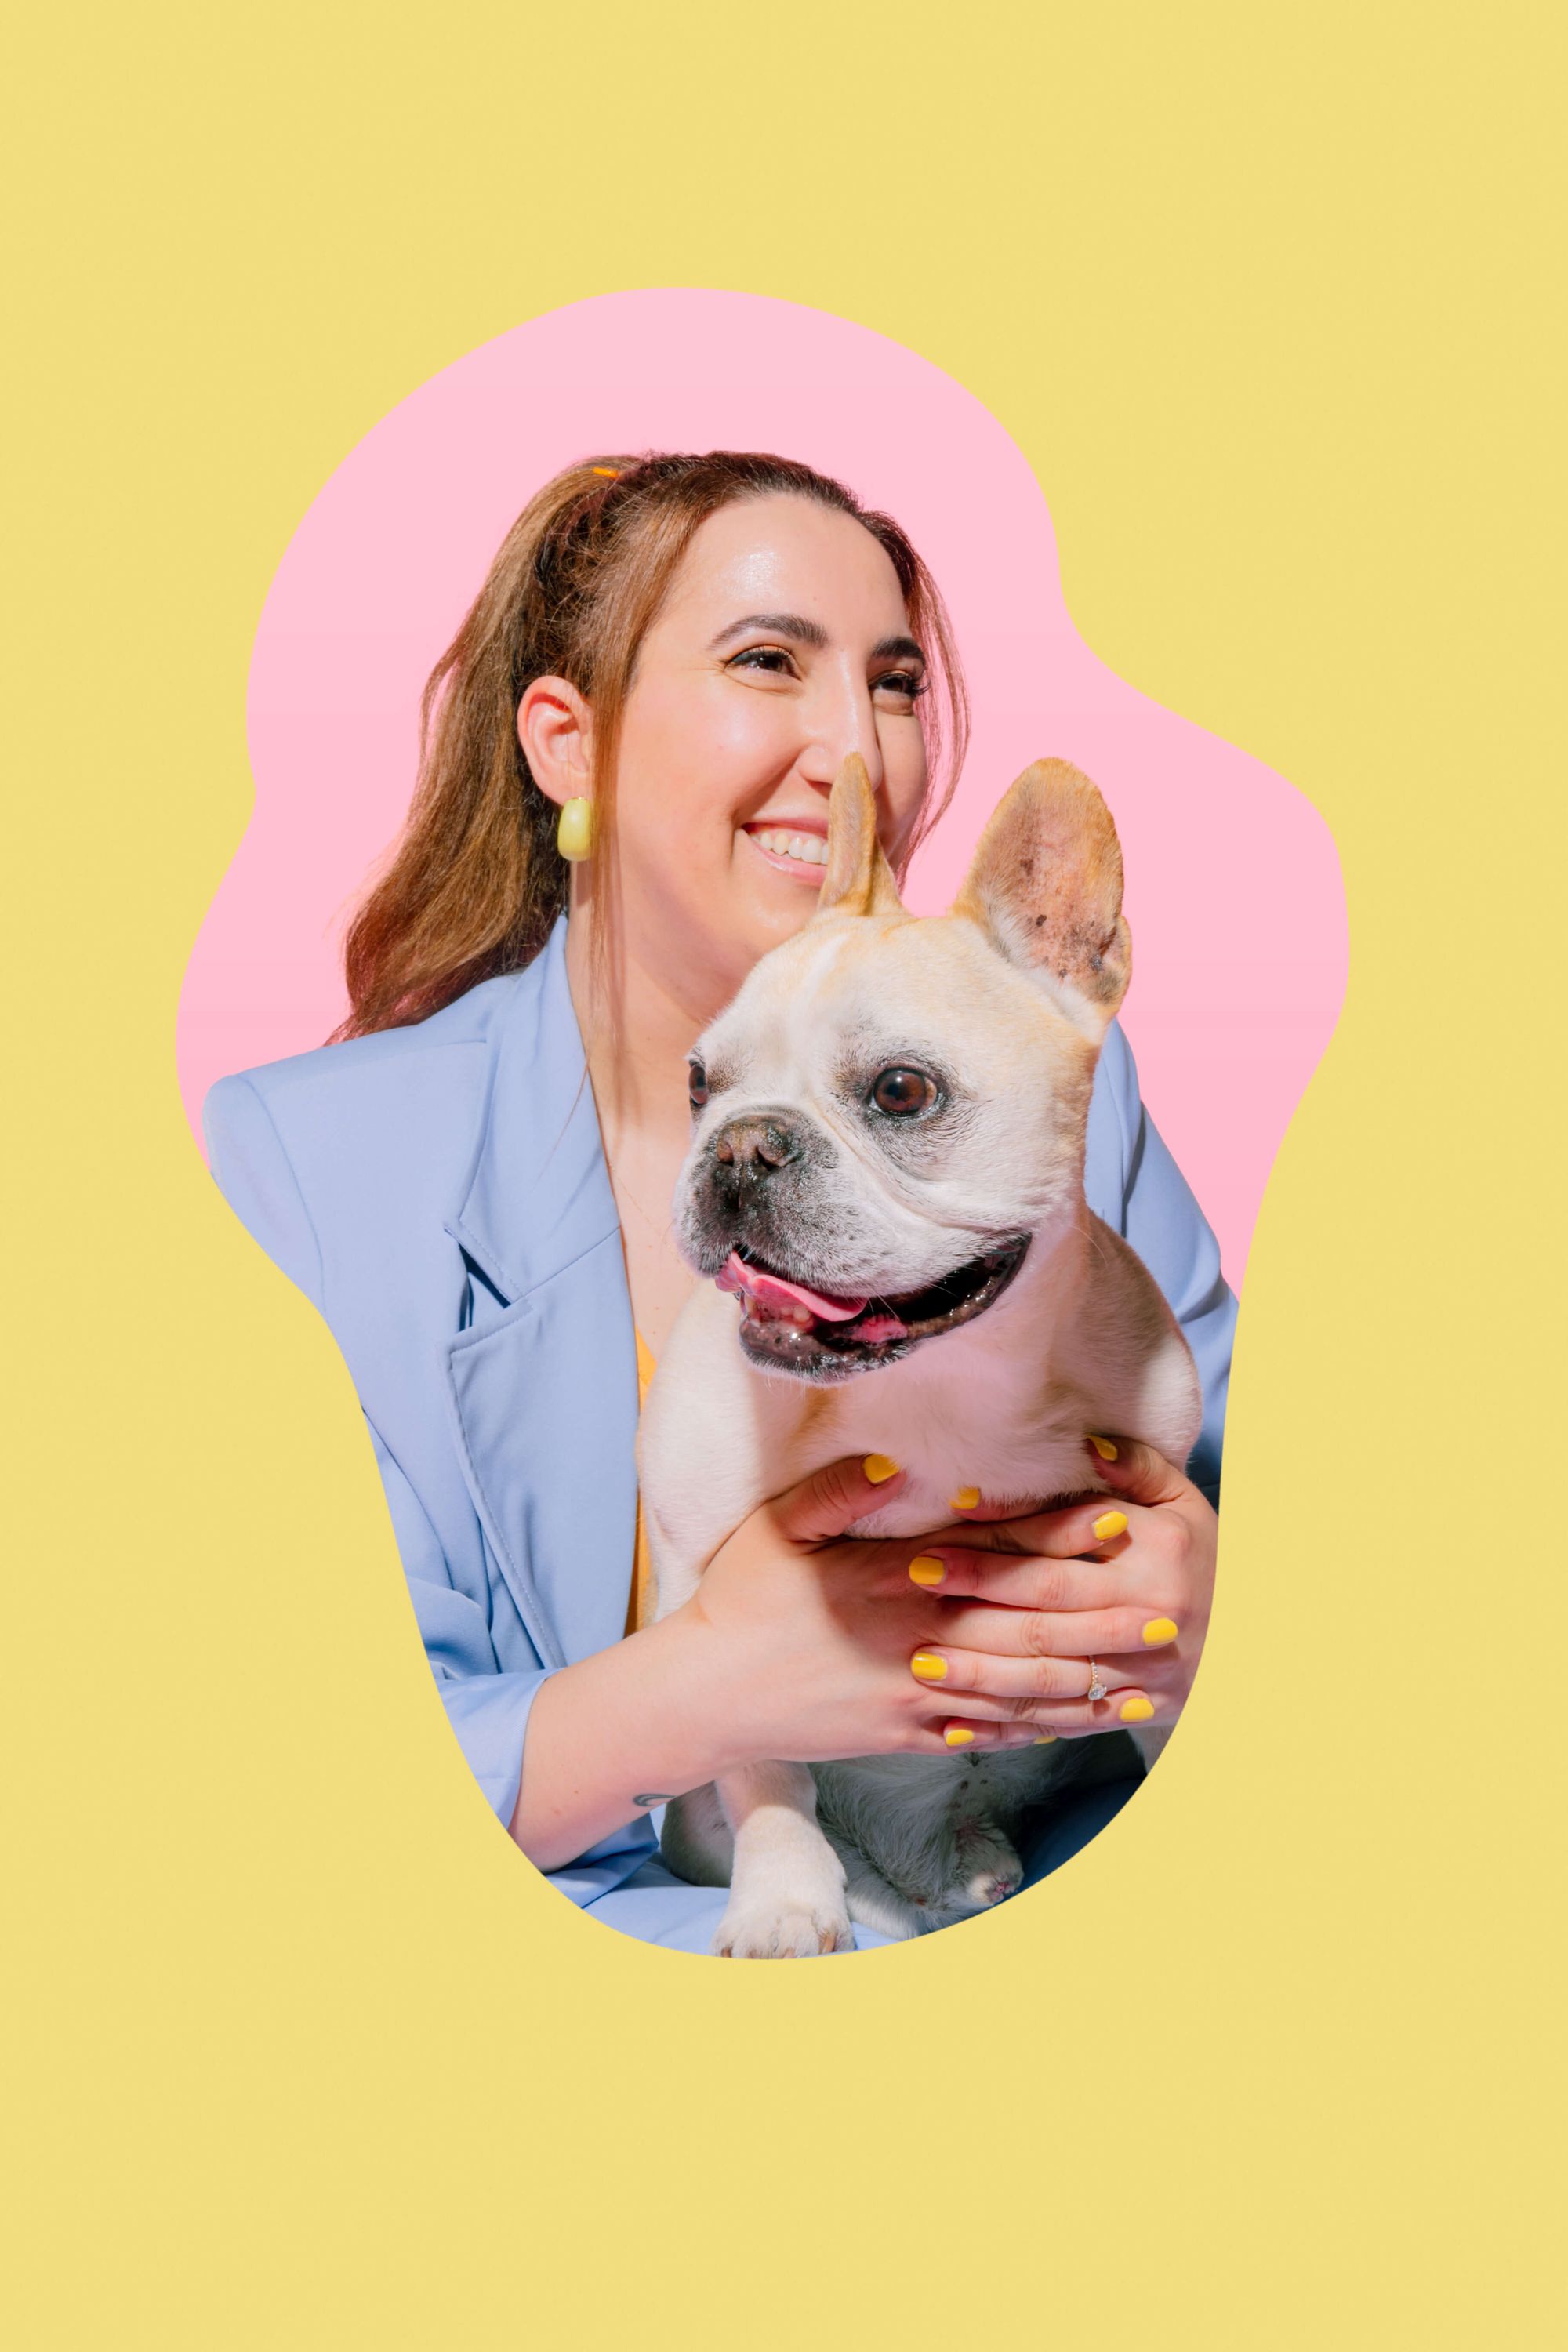 An image of the founder, Leda, smiling and looking off into the distance while holding her French Bulldog, Handsome. Handsome has white fur and is sticking out his tongue. 